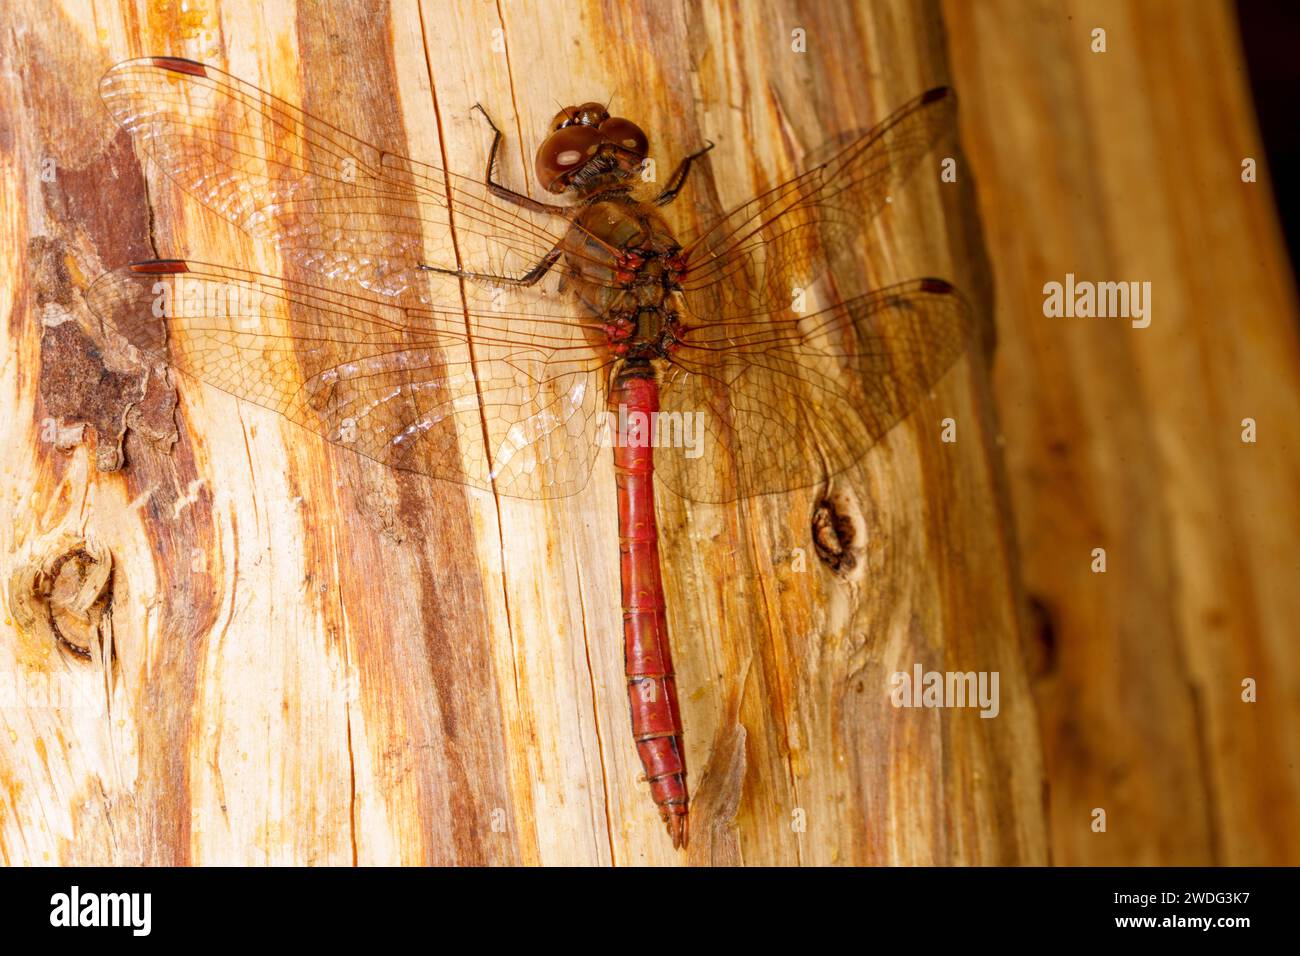 Sympetrum vulgatum Family Libellulidae Genus Sympetrum Vagrant darter dragonfly wild nature insect wallpaper, picture, photography Stock Photo